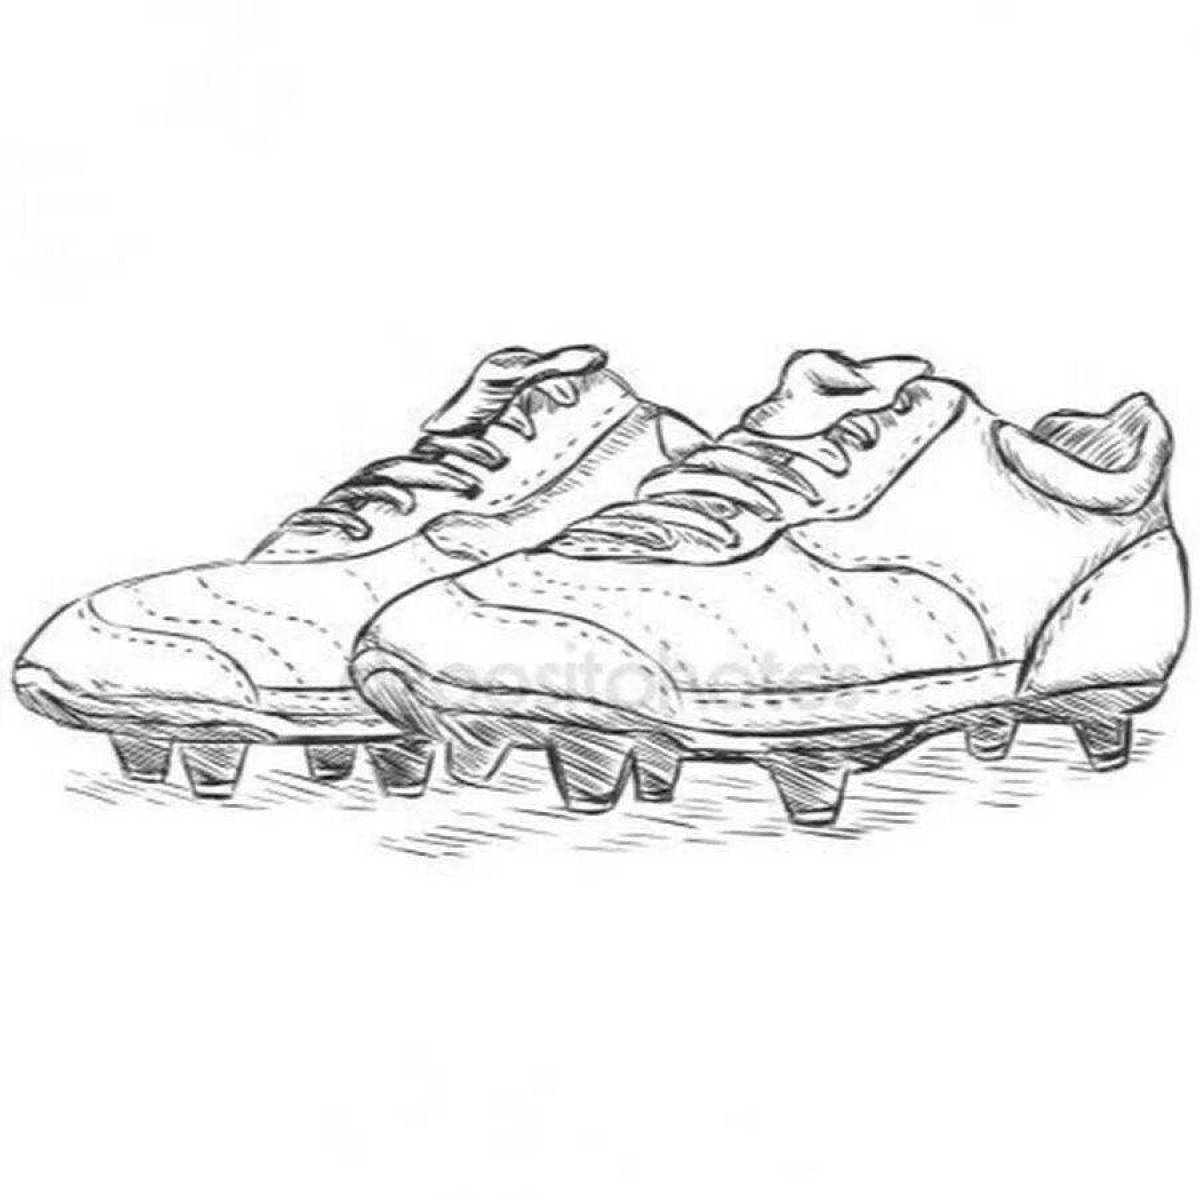 Coloring page dazzling football boots